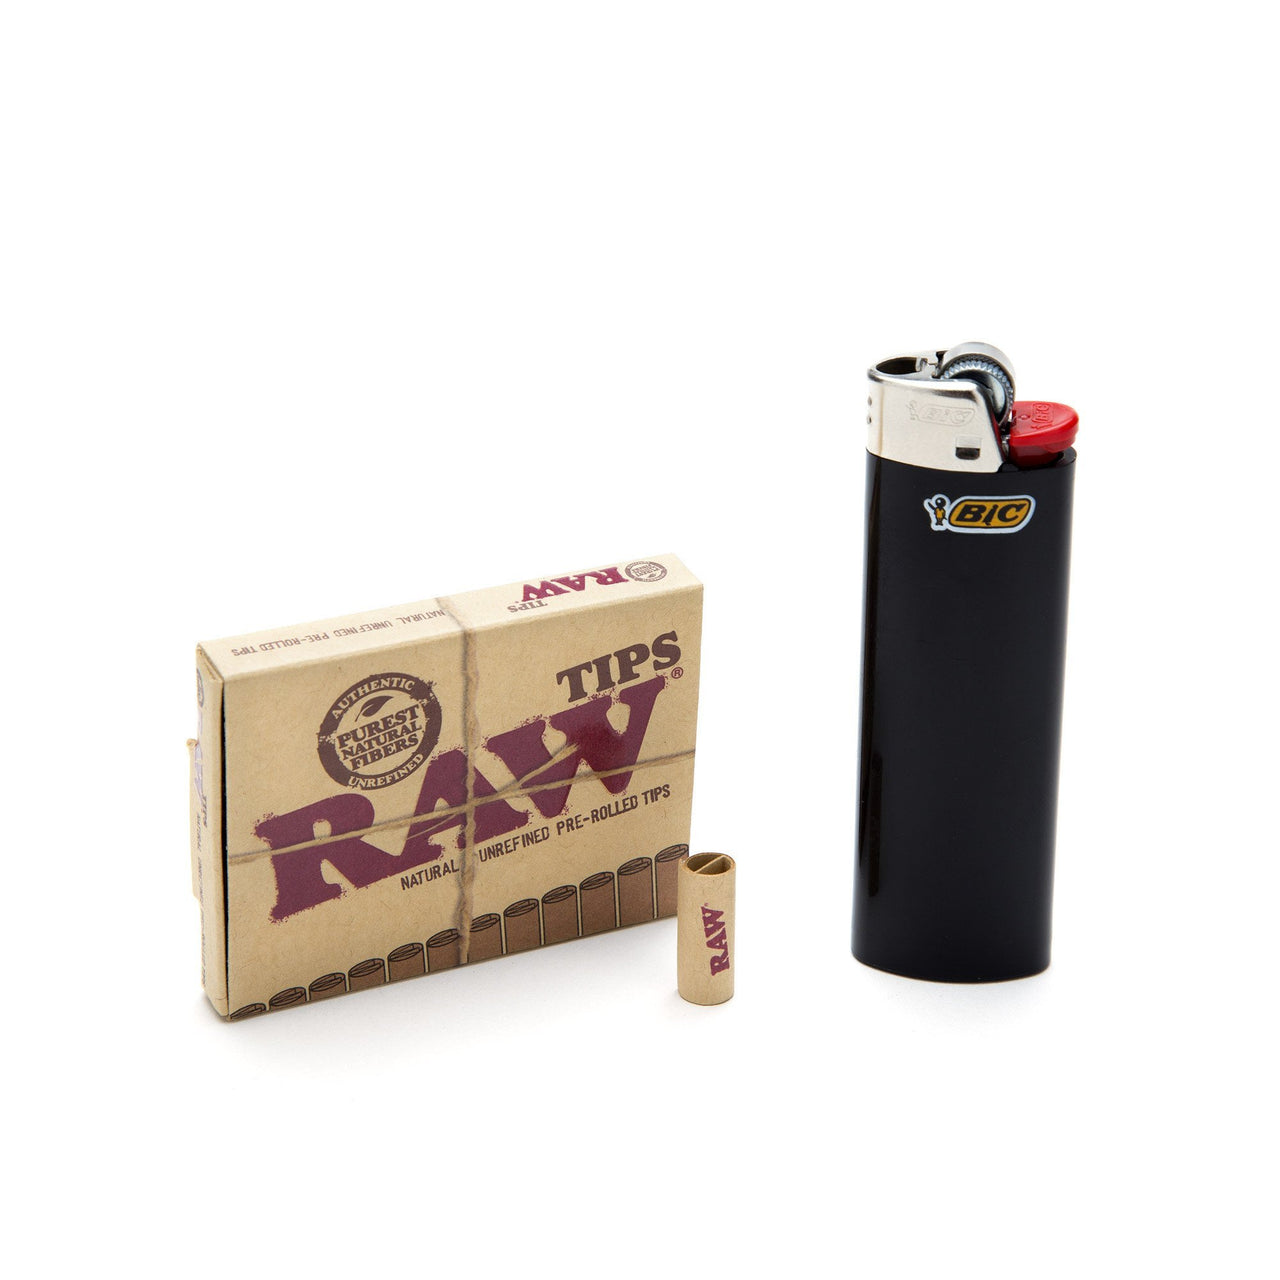 RAW Pre-Rolled Tips 21 Pack - 420 Science - The most trusted online smoke shop.